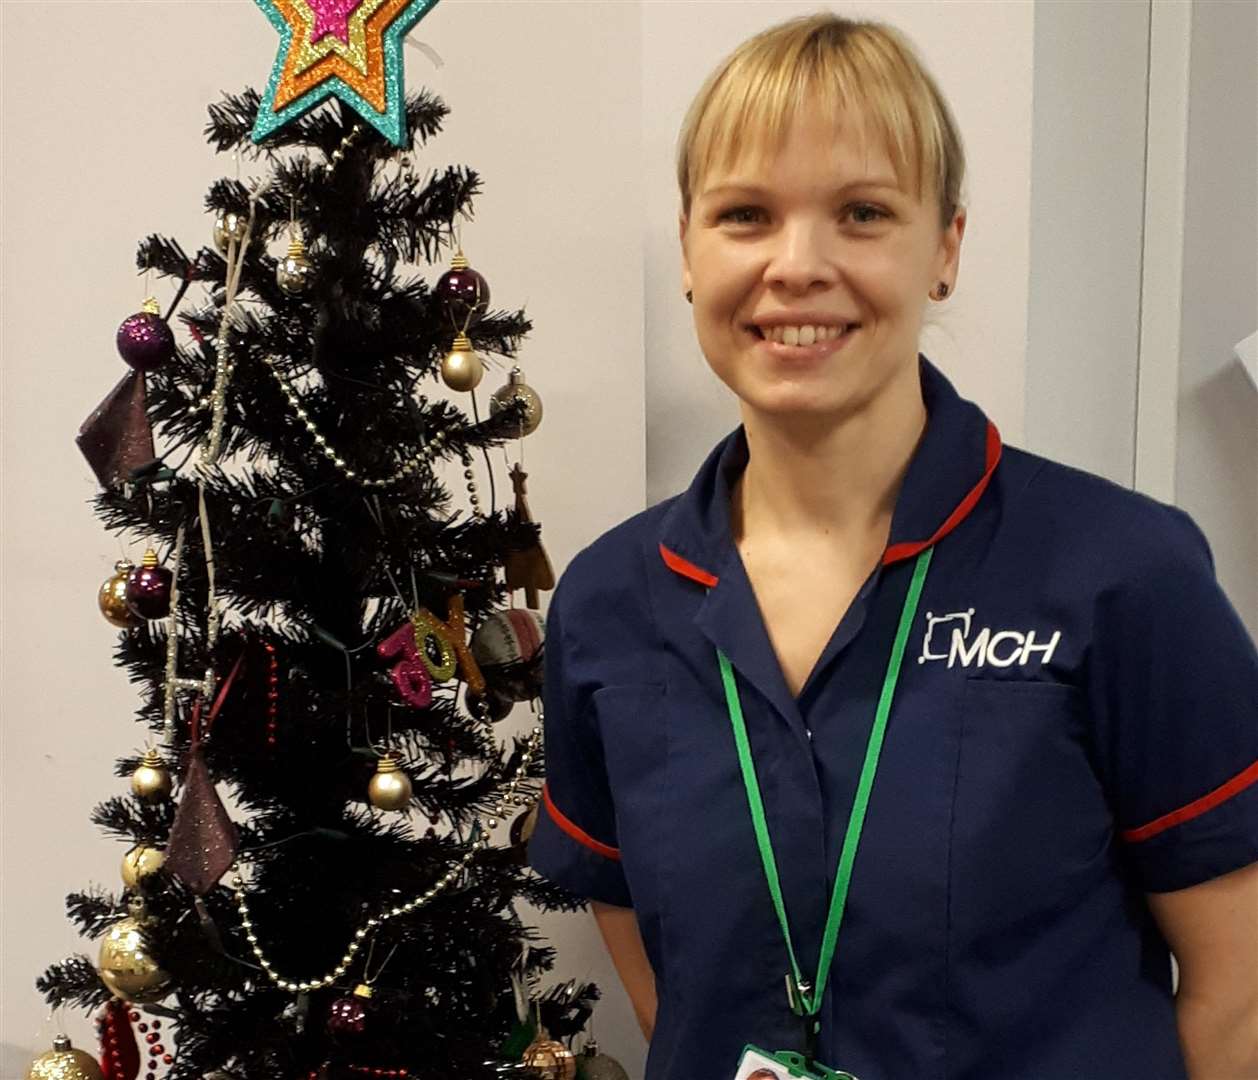 Hannah Hatchett is a dietician from Medway Community Healthcare